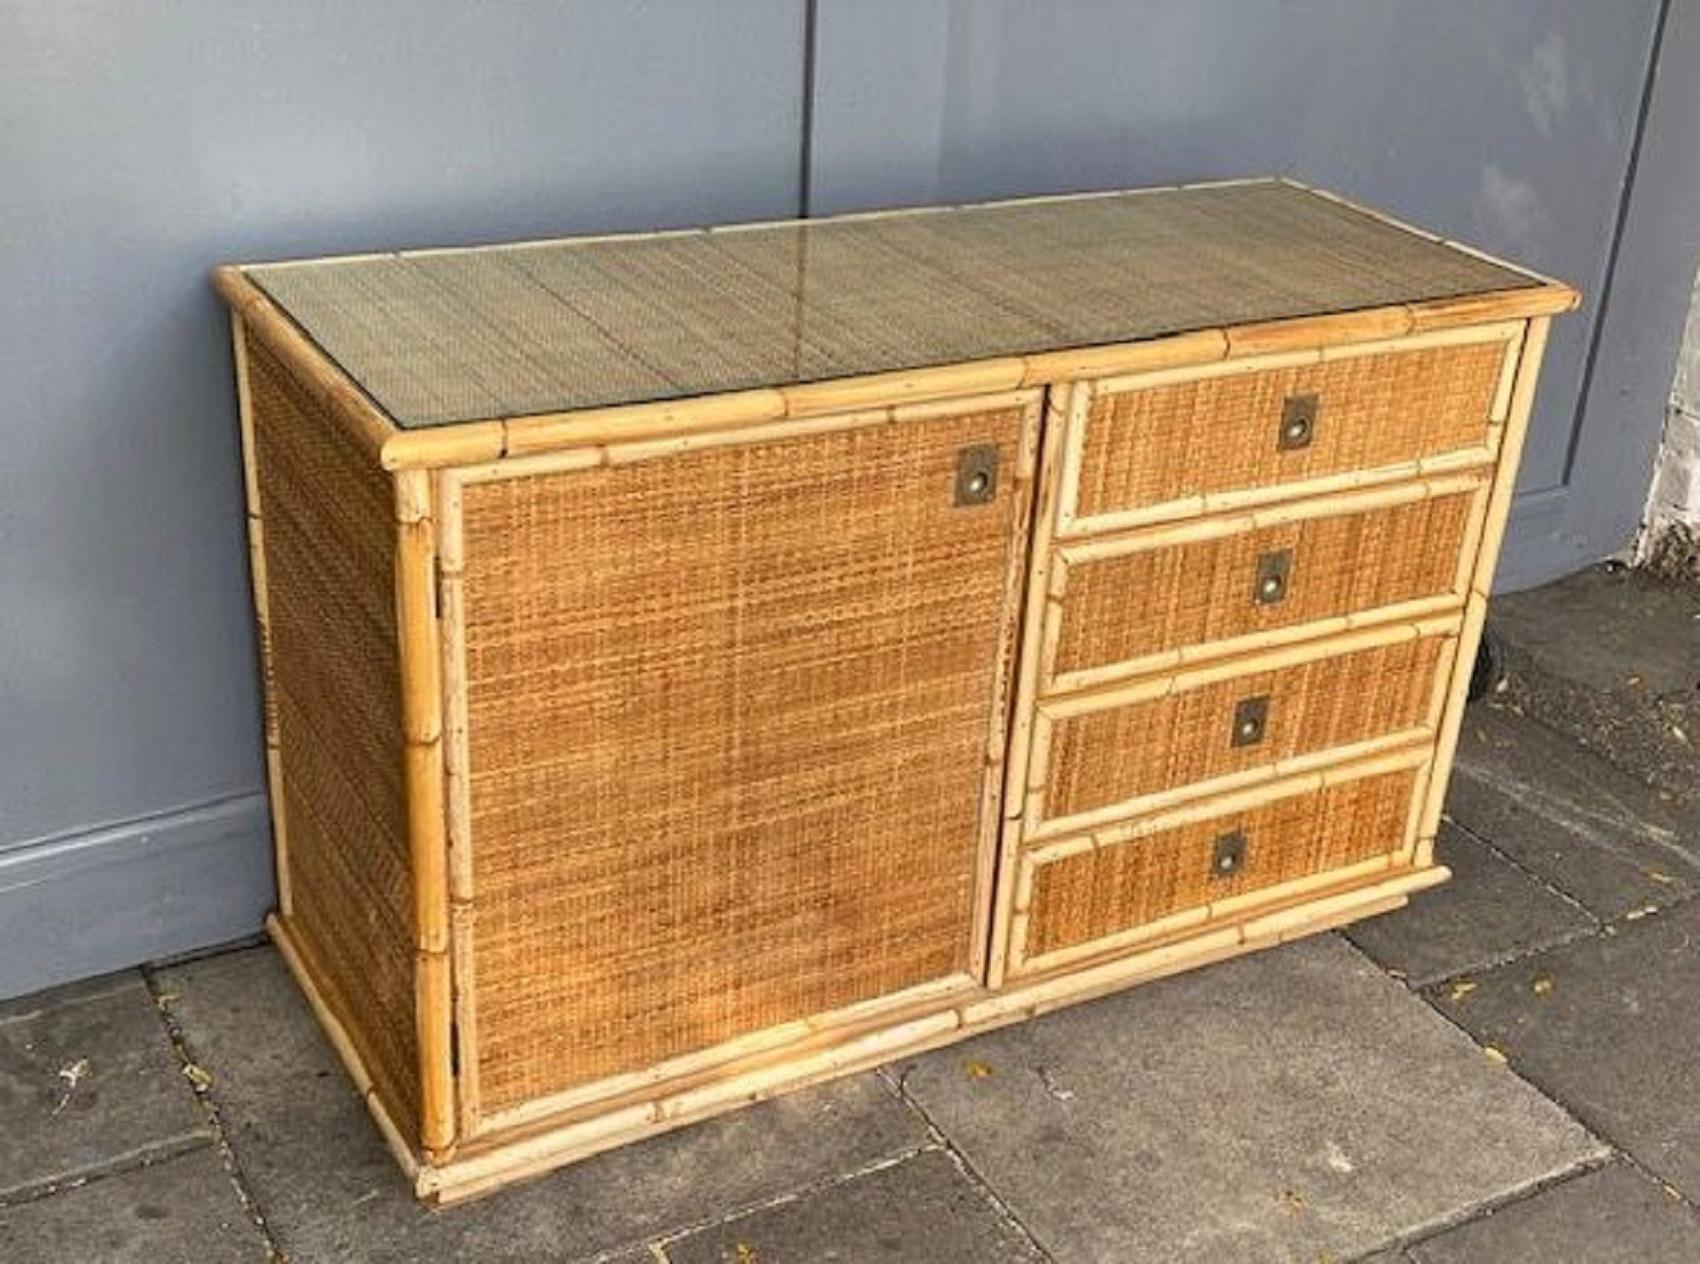 Mid-century Rattan / Cane sideboard by Dal Vera, Italy 1970s.

Beautiful Dal Vera rattan sideboard. Wooden structure with rattan and cane detail, covered in close weave matting, with cane handles. Opening with a door and four drawers, with solid